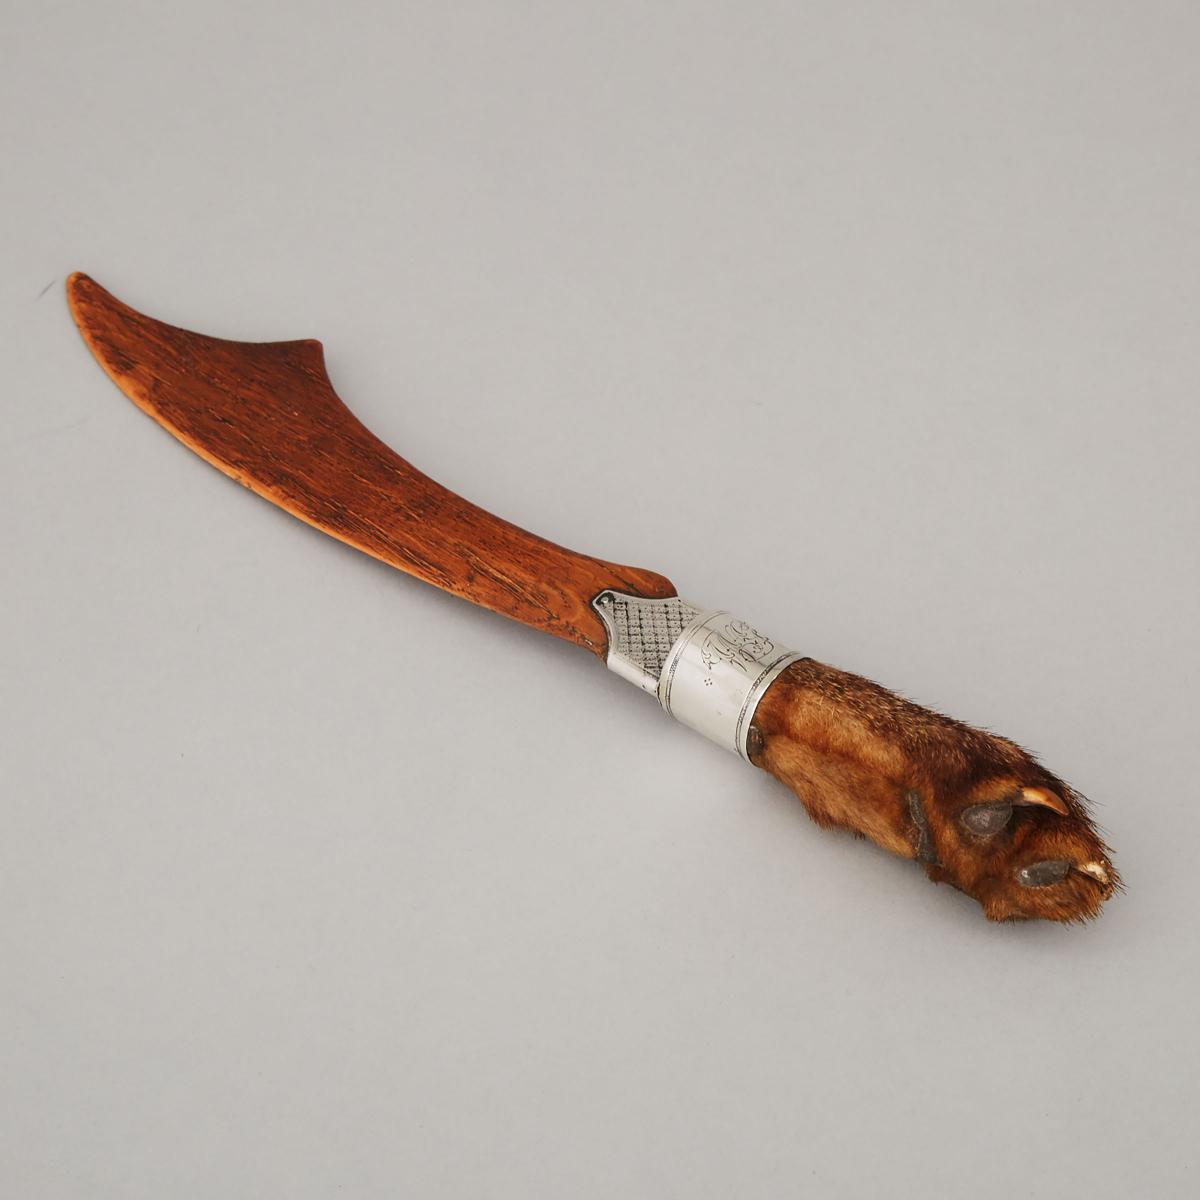 Victorian Silver Mounted Fox's Foot Paper Knife, probably Scottish, 19th century, length 11 in — 28